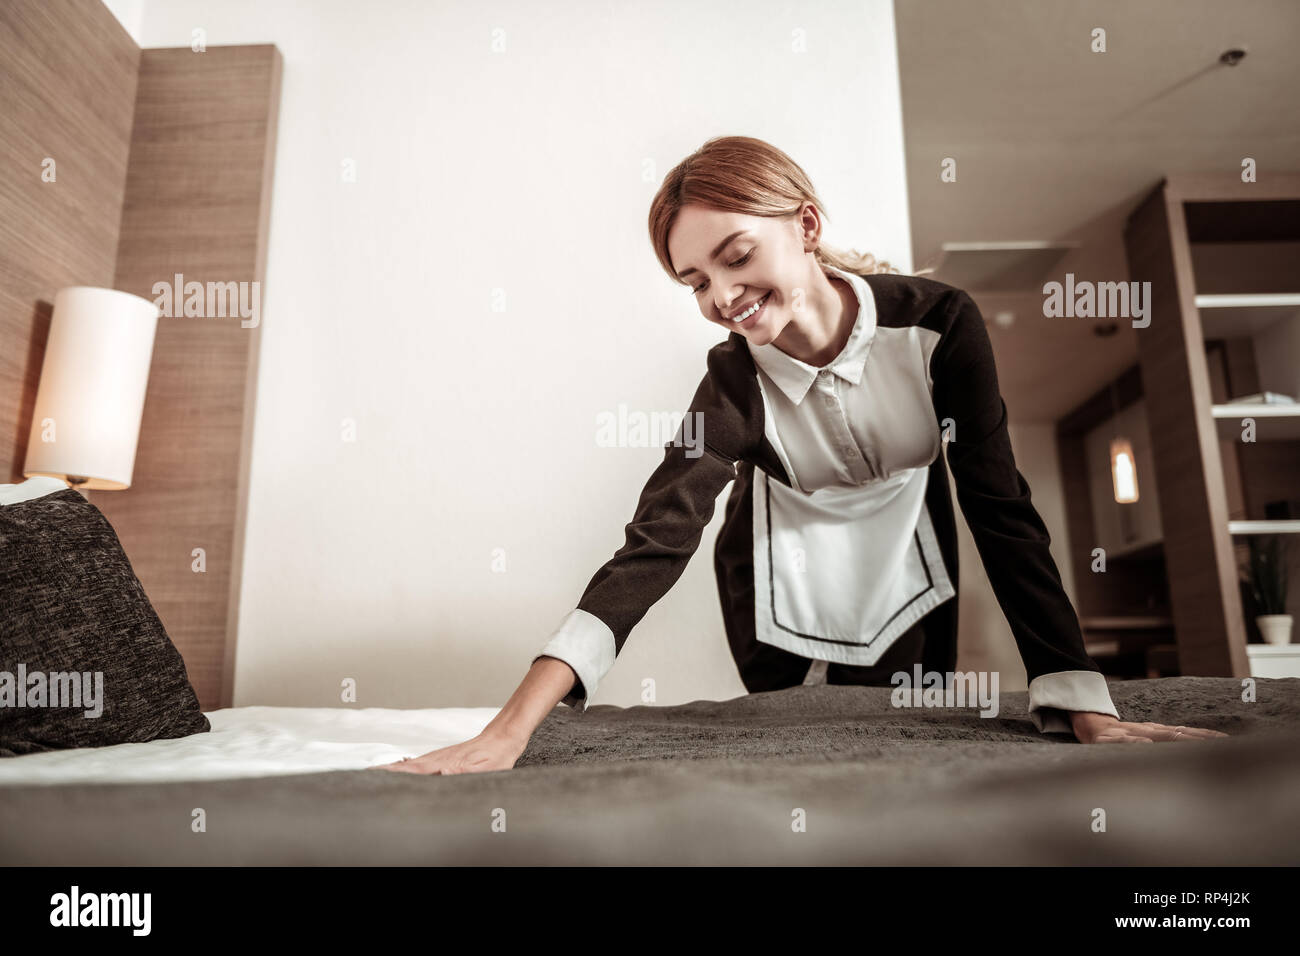 Young housekeeper feeling nice having her first working day Stock Photo